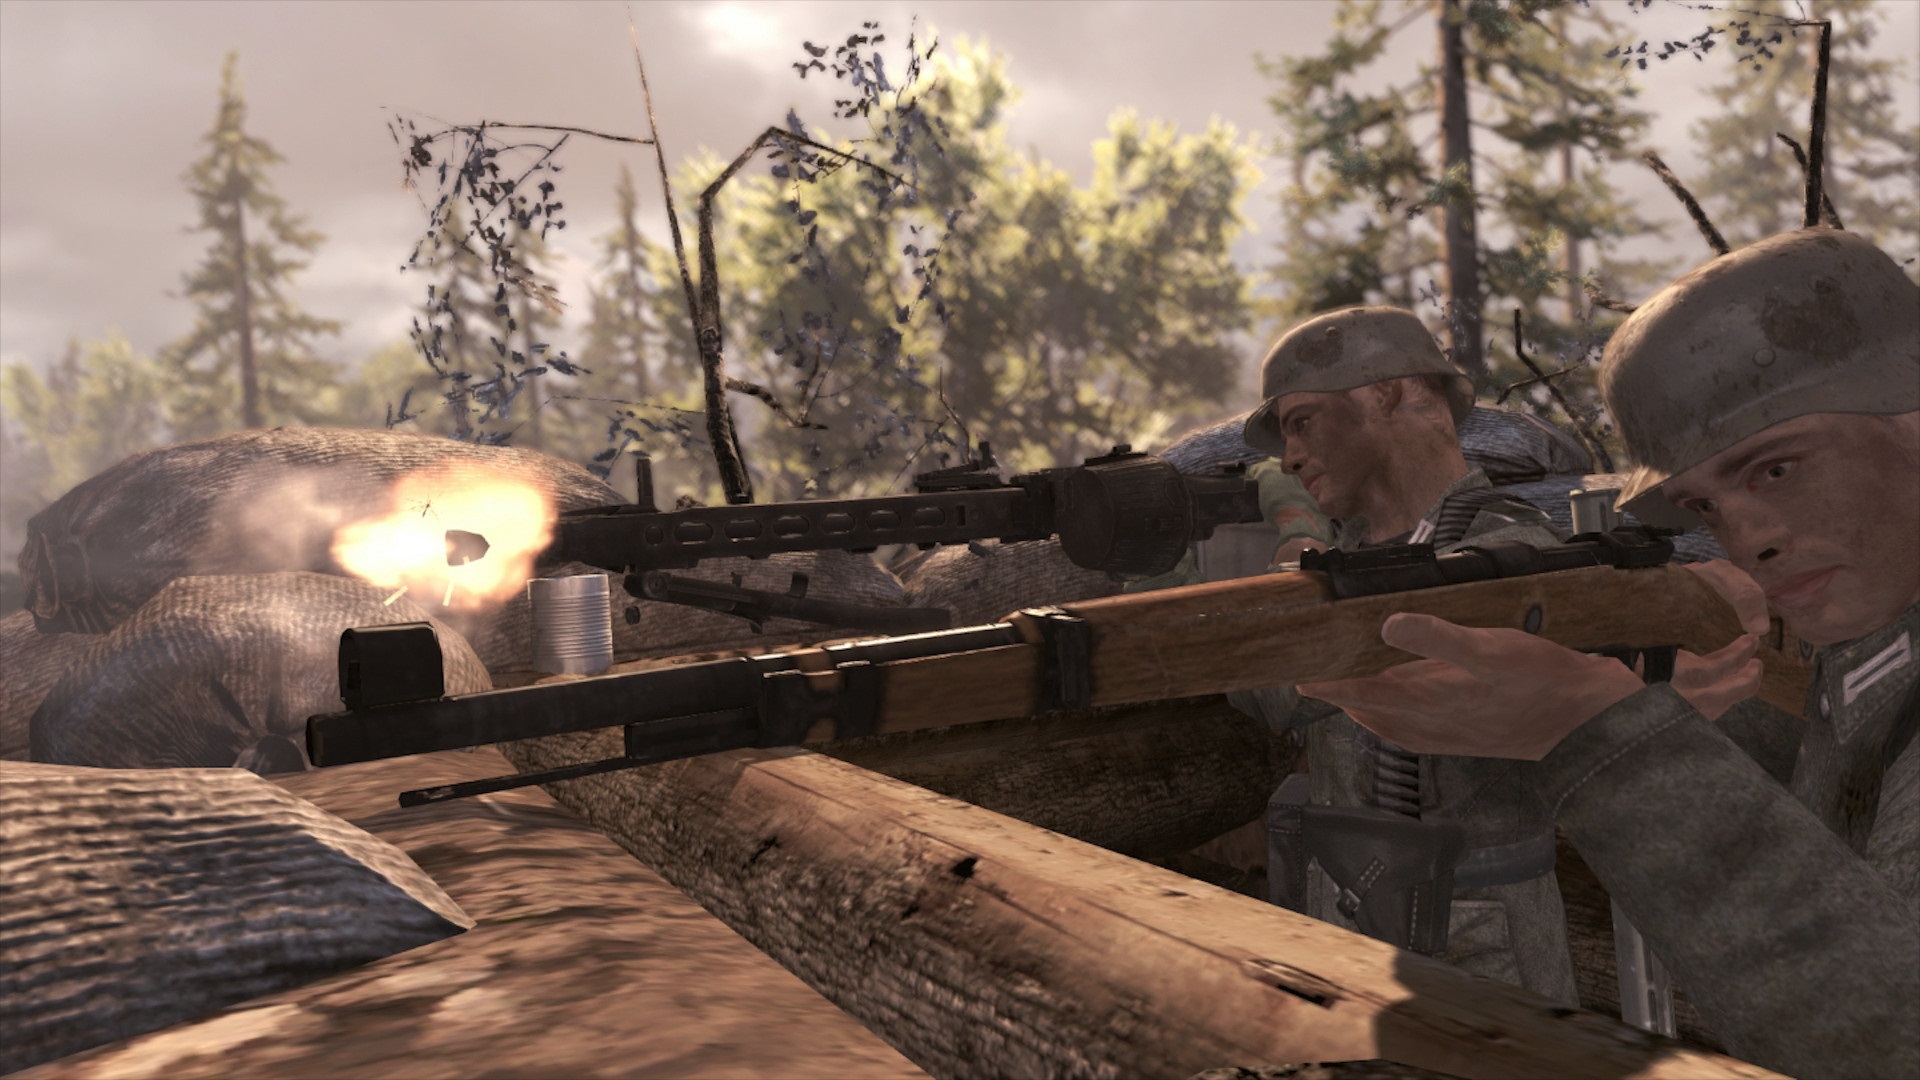 Best WW2 games: Red Orchestra 2. Image shows two soldiers with guns. They are firing them.